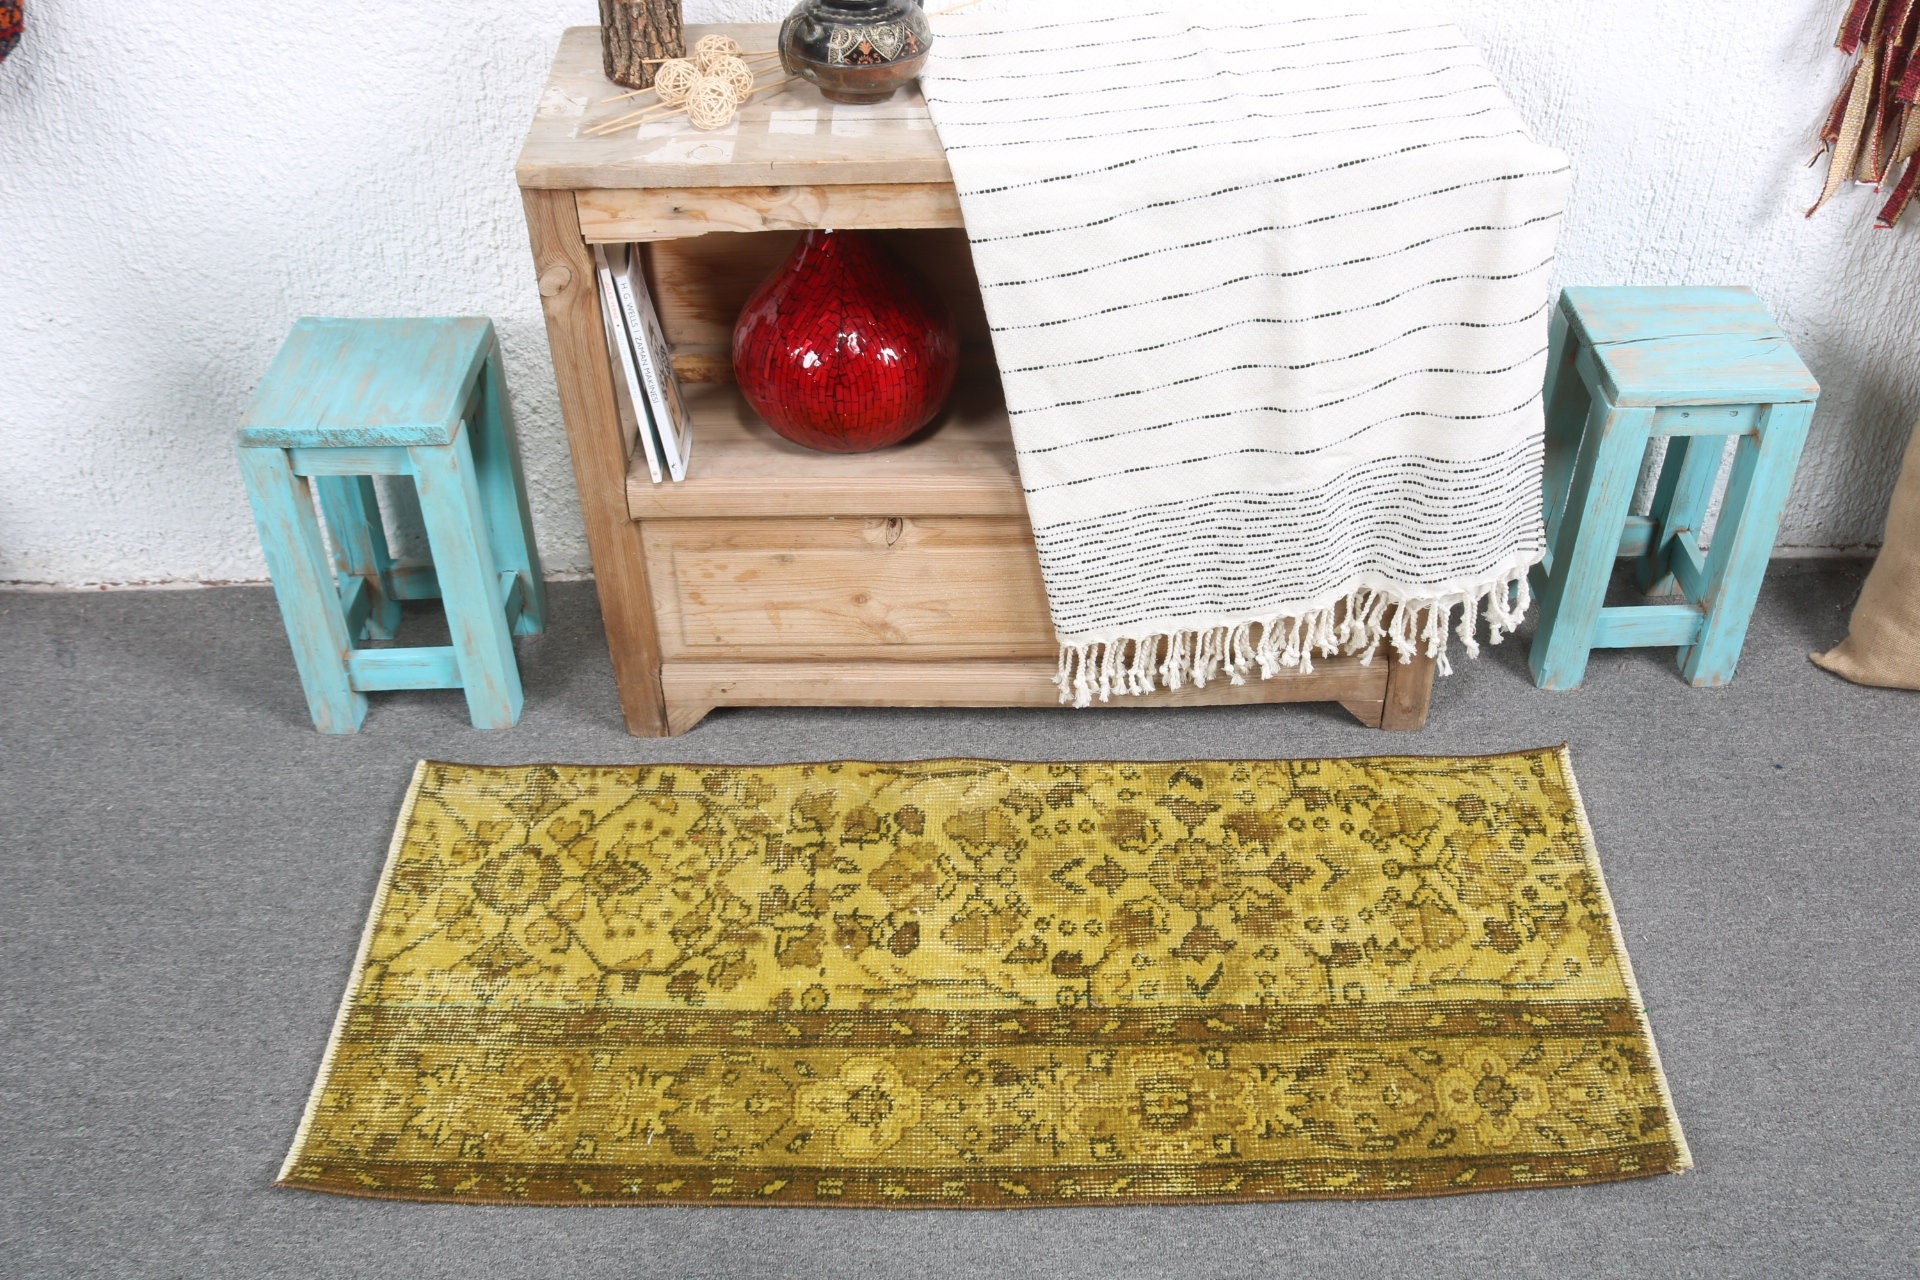 1.6x3.6 ft Small Rugs, Vintage Rug, Bath Rug, Car Mat Rug, Rugs for Entry, Home Decor Rug, Yellow Kitchen Rug, Turkish Rug, Oushak Rugs